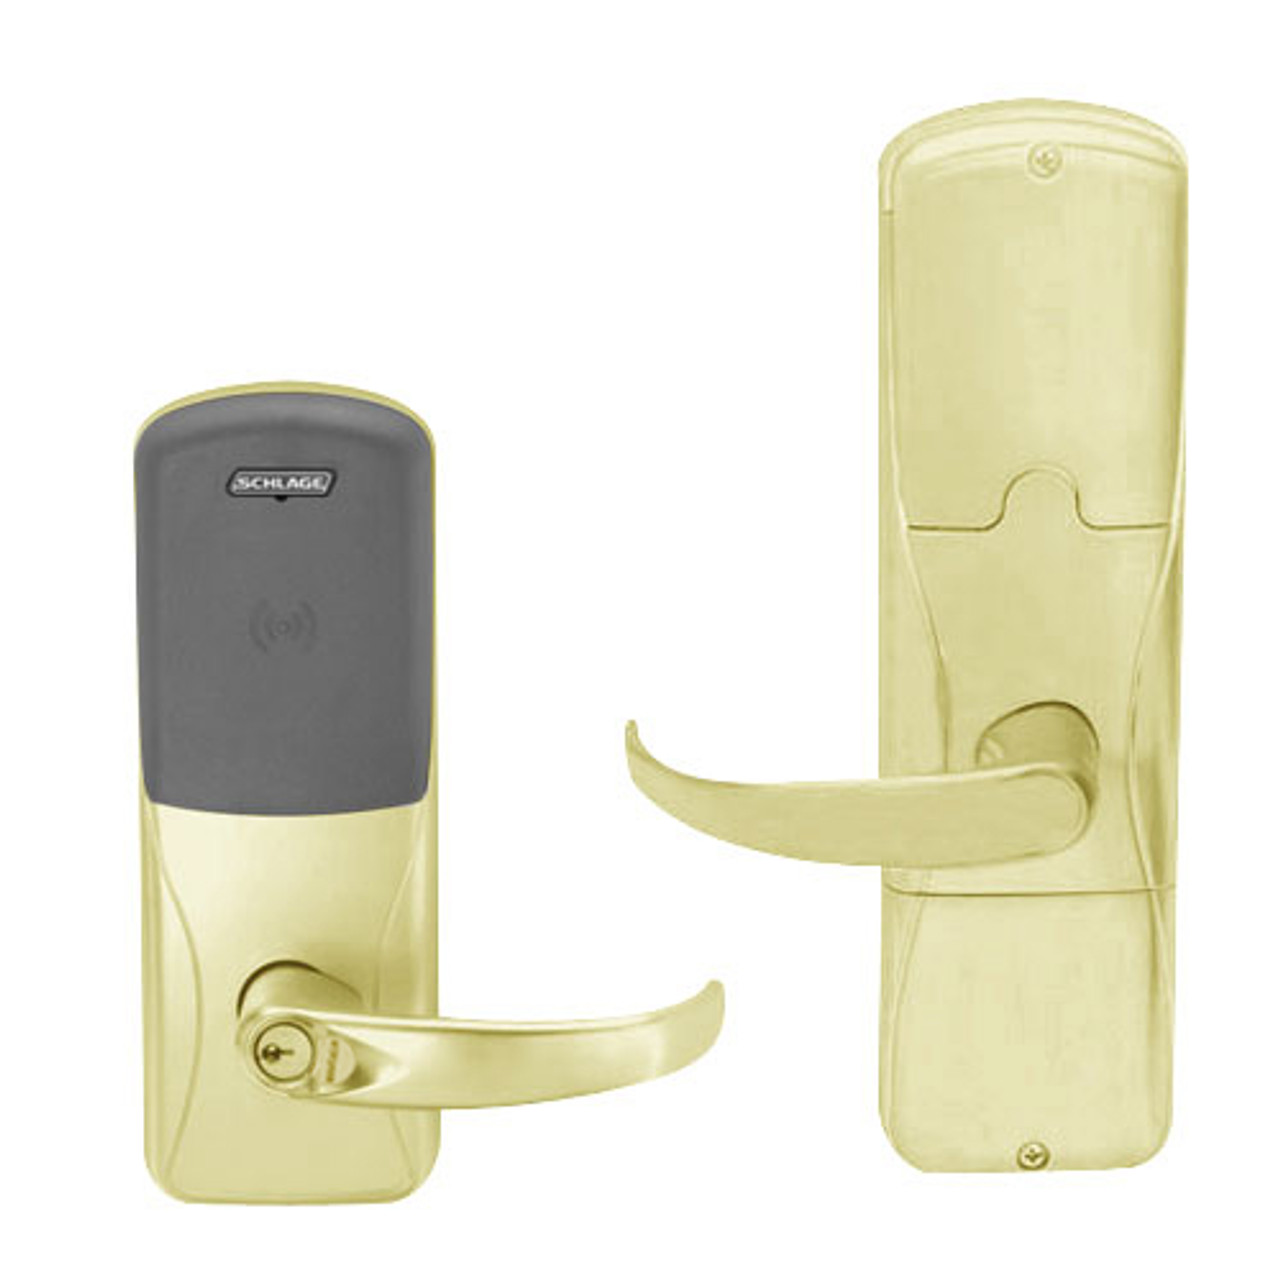 AD200-MD-60-MT-SPA-RD-606 Schlage Apartment Mortise Deadbolt Multi-Technology Lock with Sparta Lever in Satin Brass